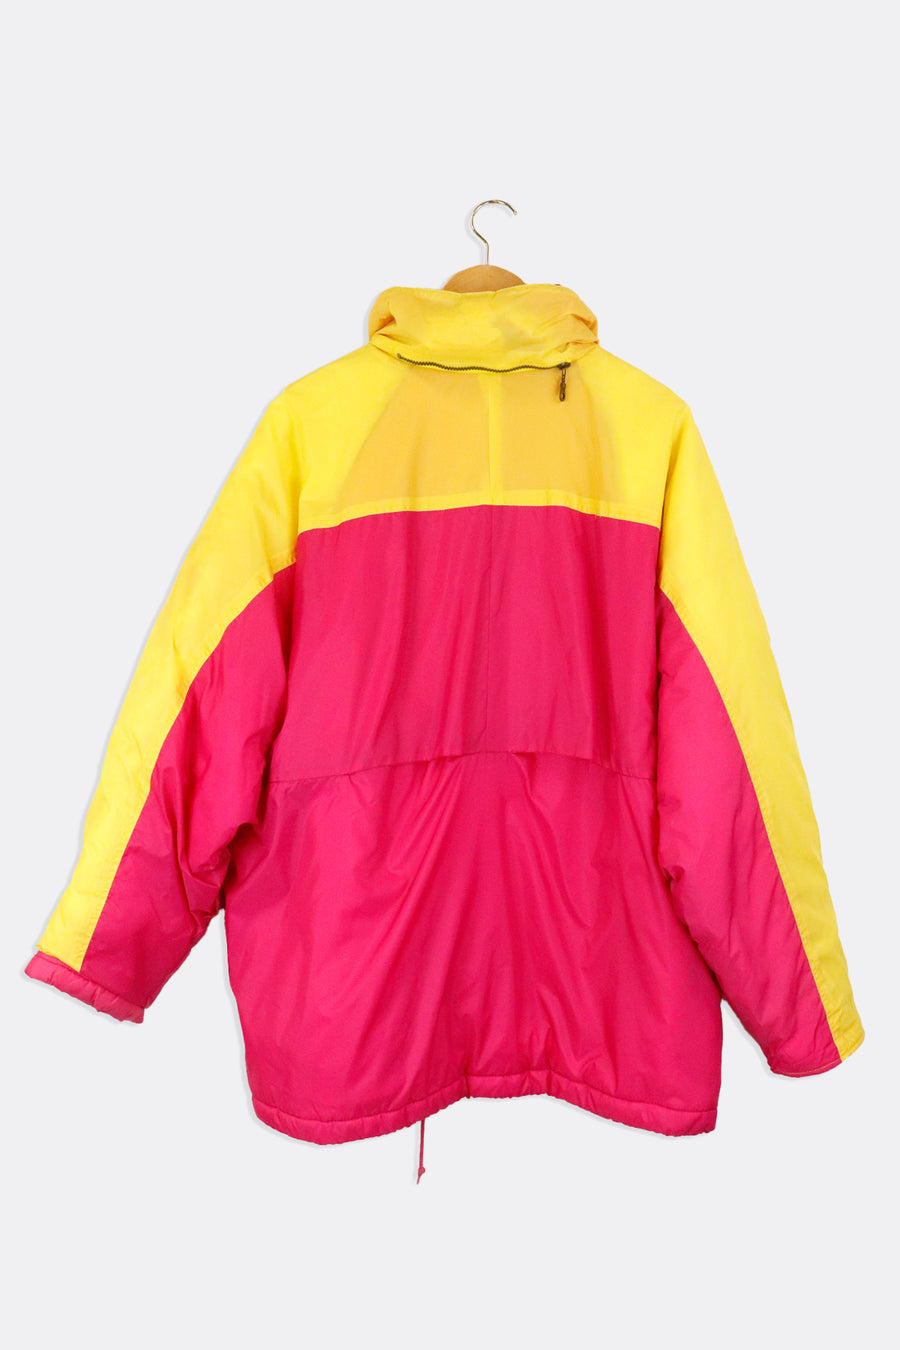 Vintage Adidas Quarter Zip Pink And Yellow Colour Block Puff Jacket